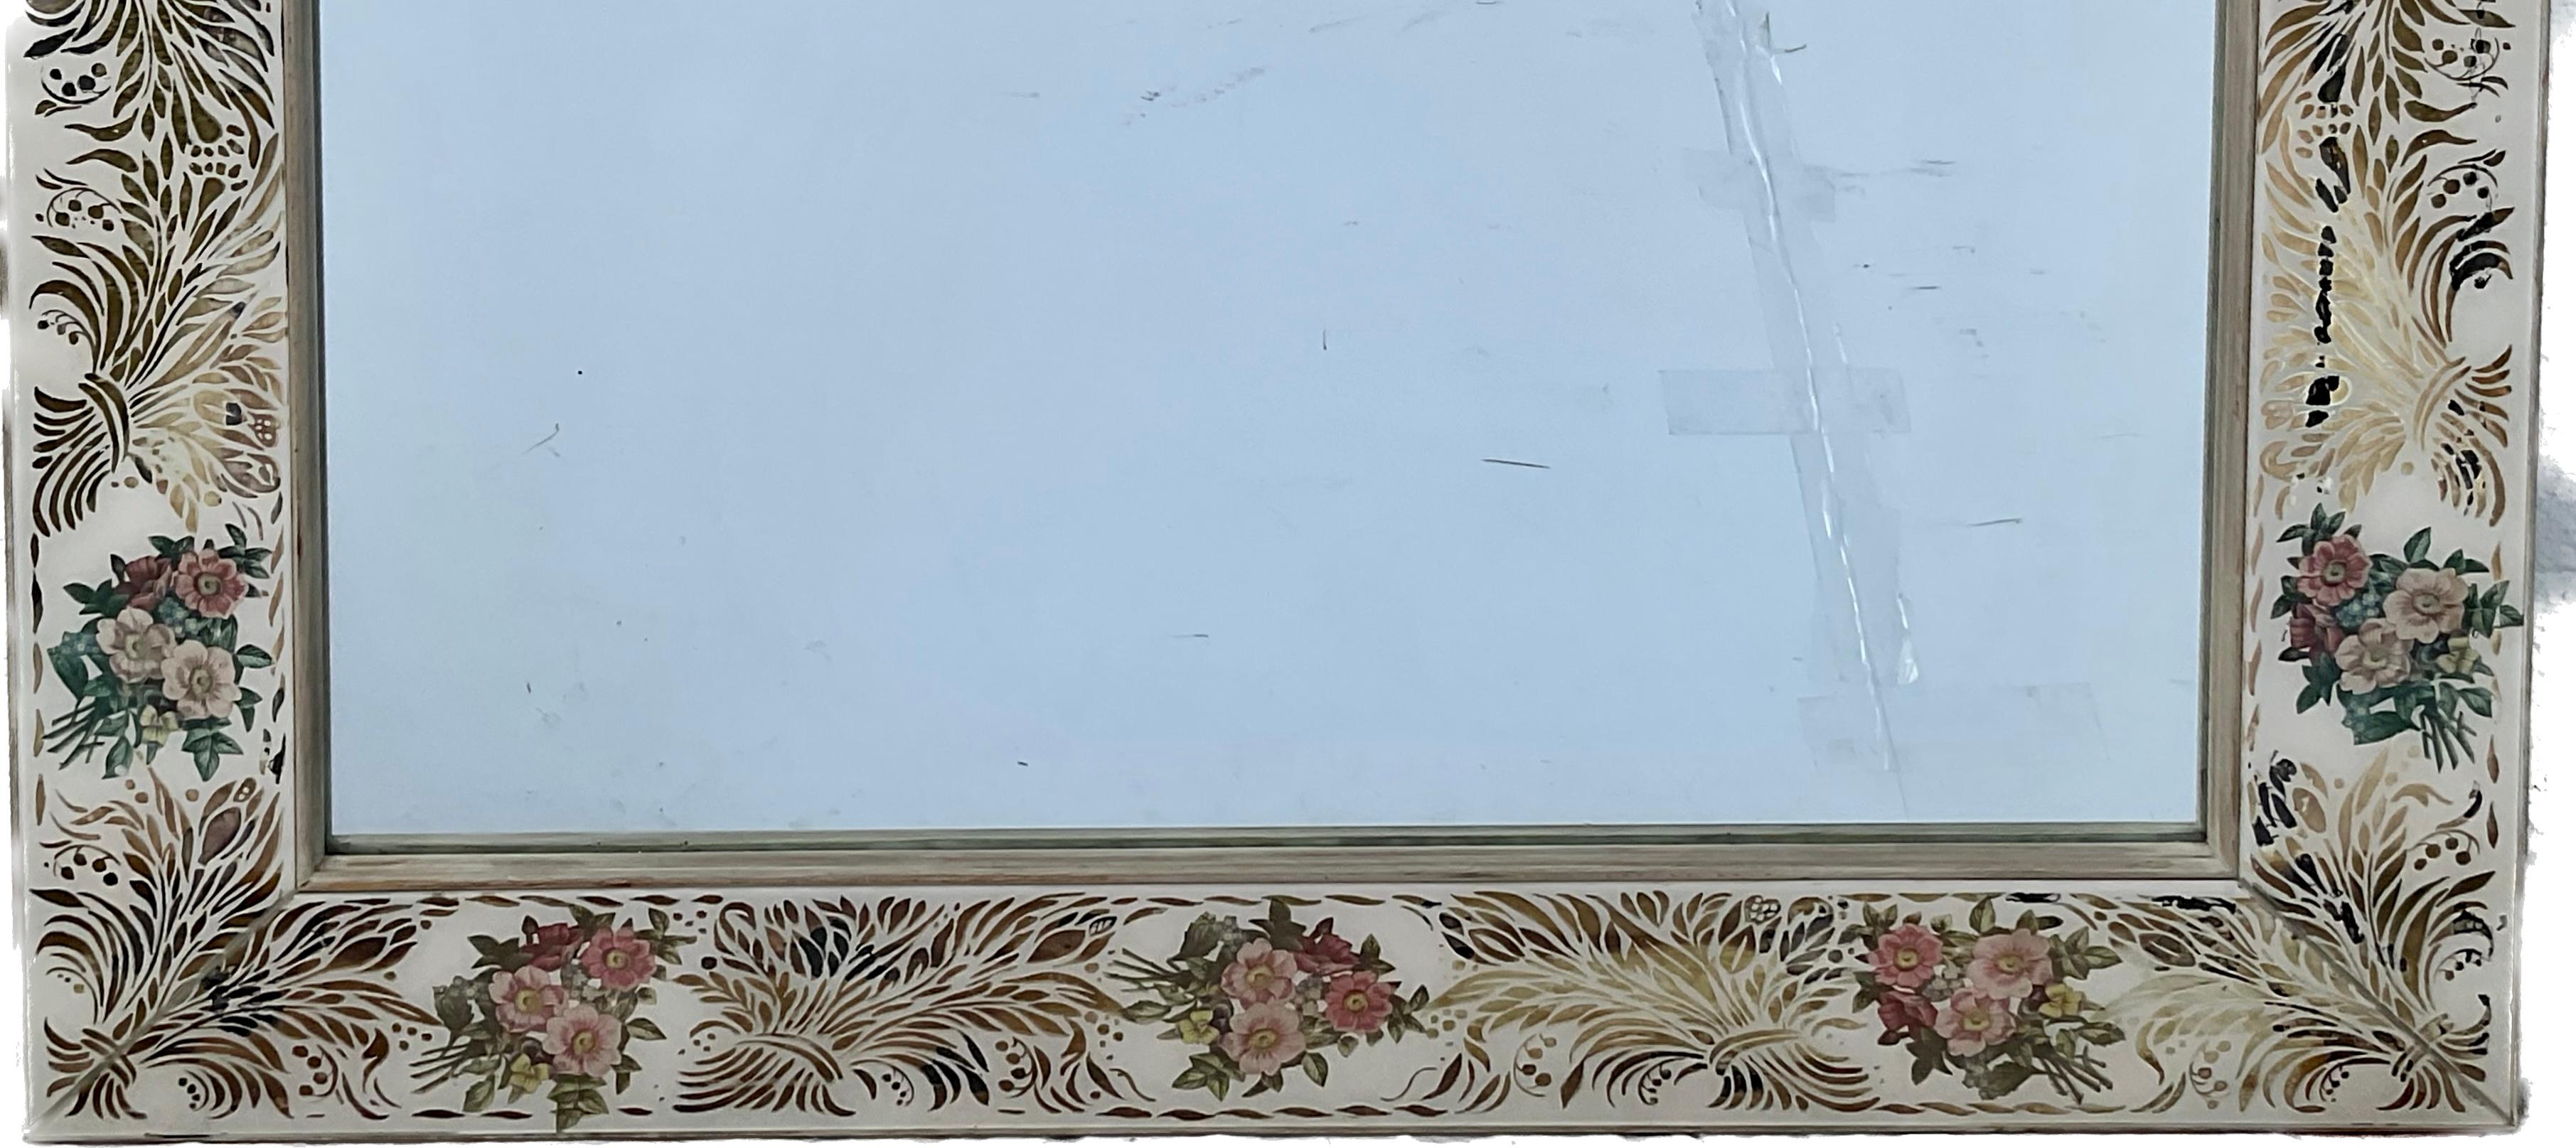 Large French Style Verre Eglomise Gold Leaf Mirror In Good Condition For Sale In Bradenton, FL